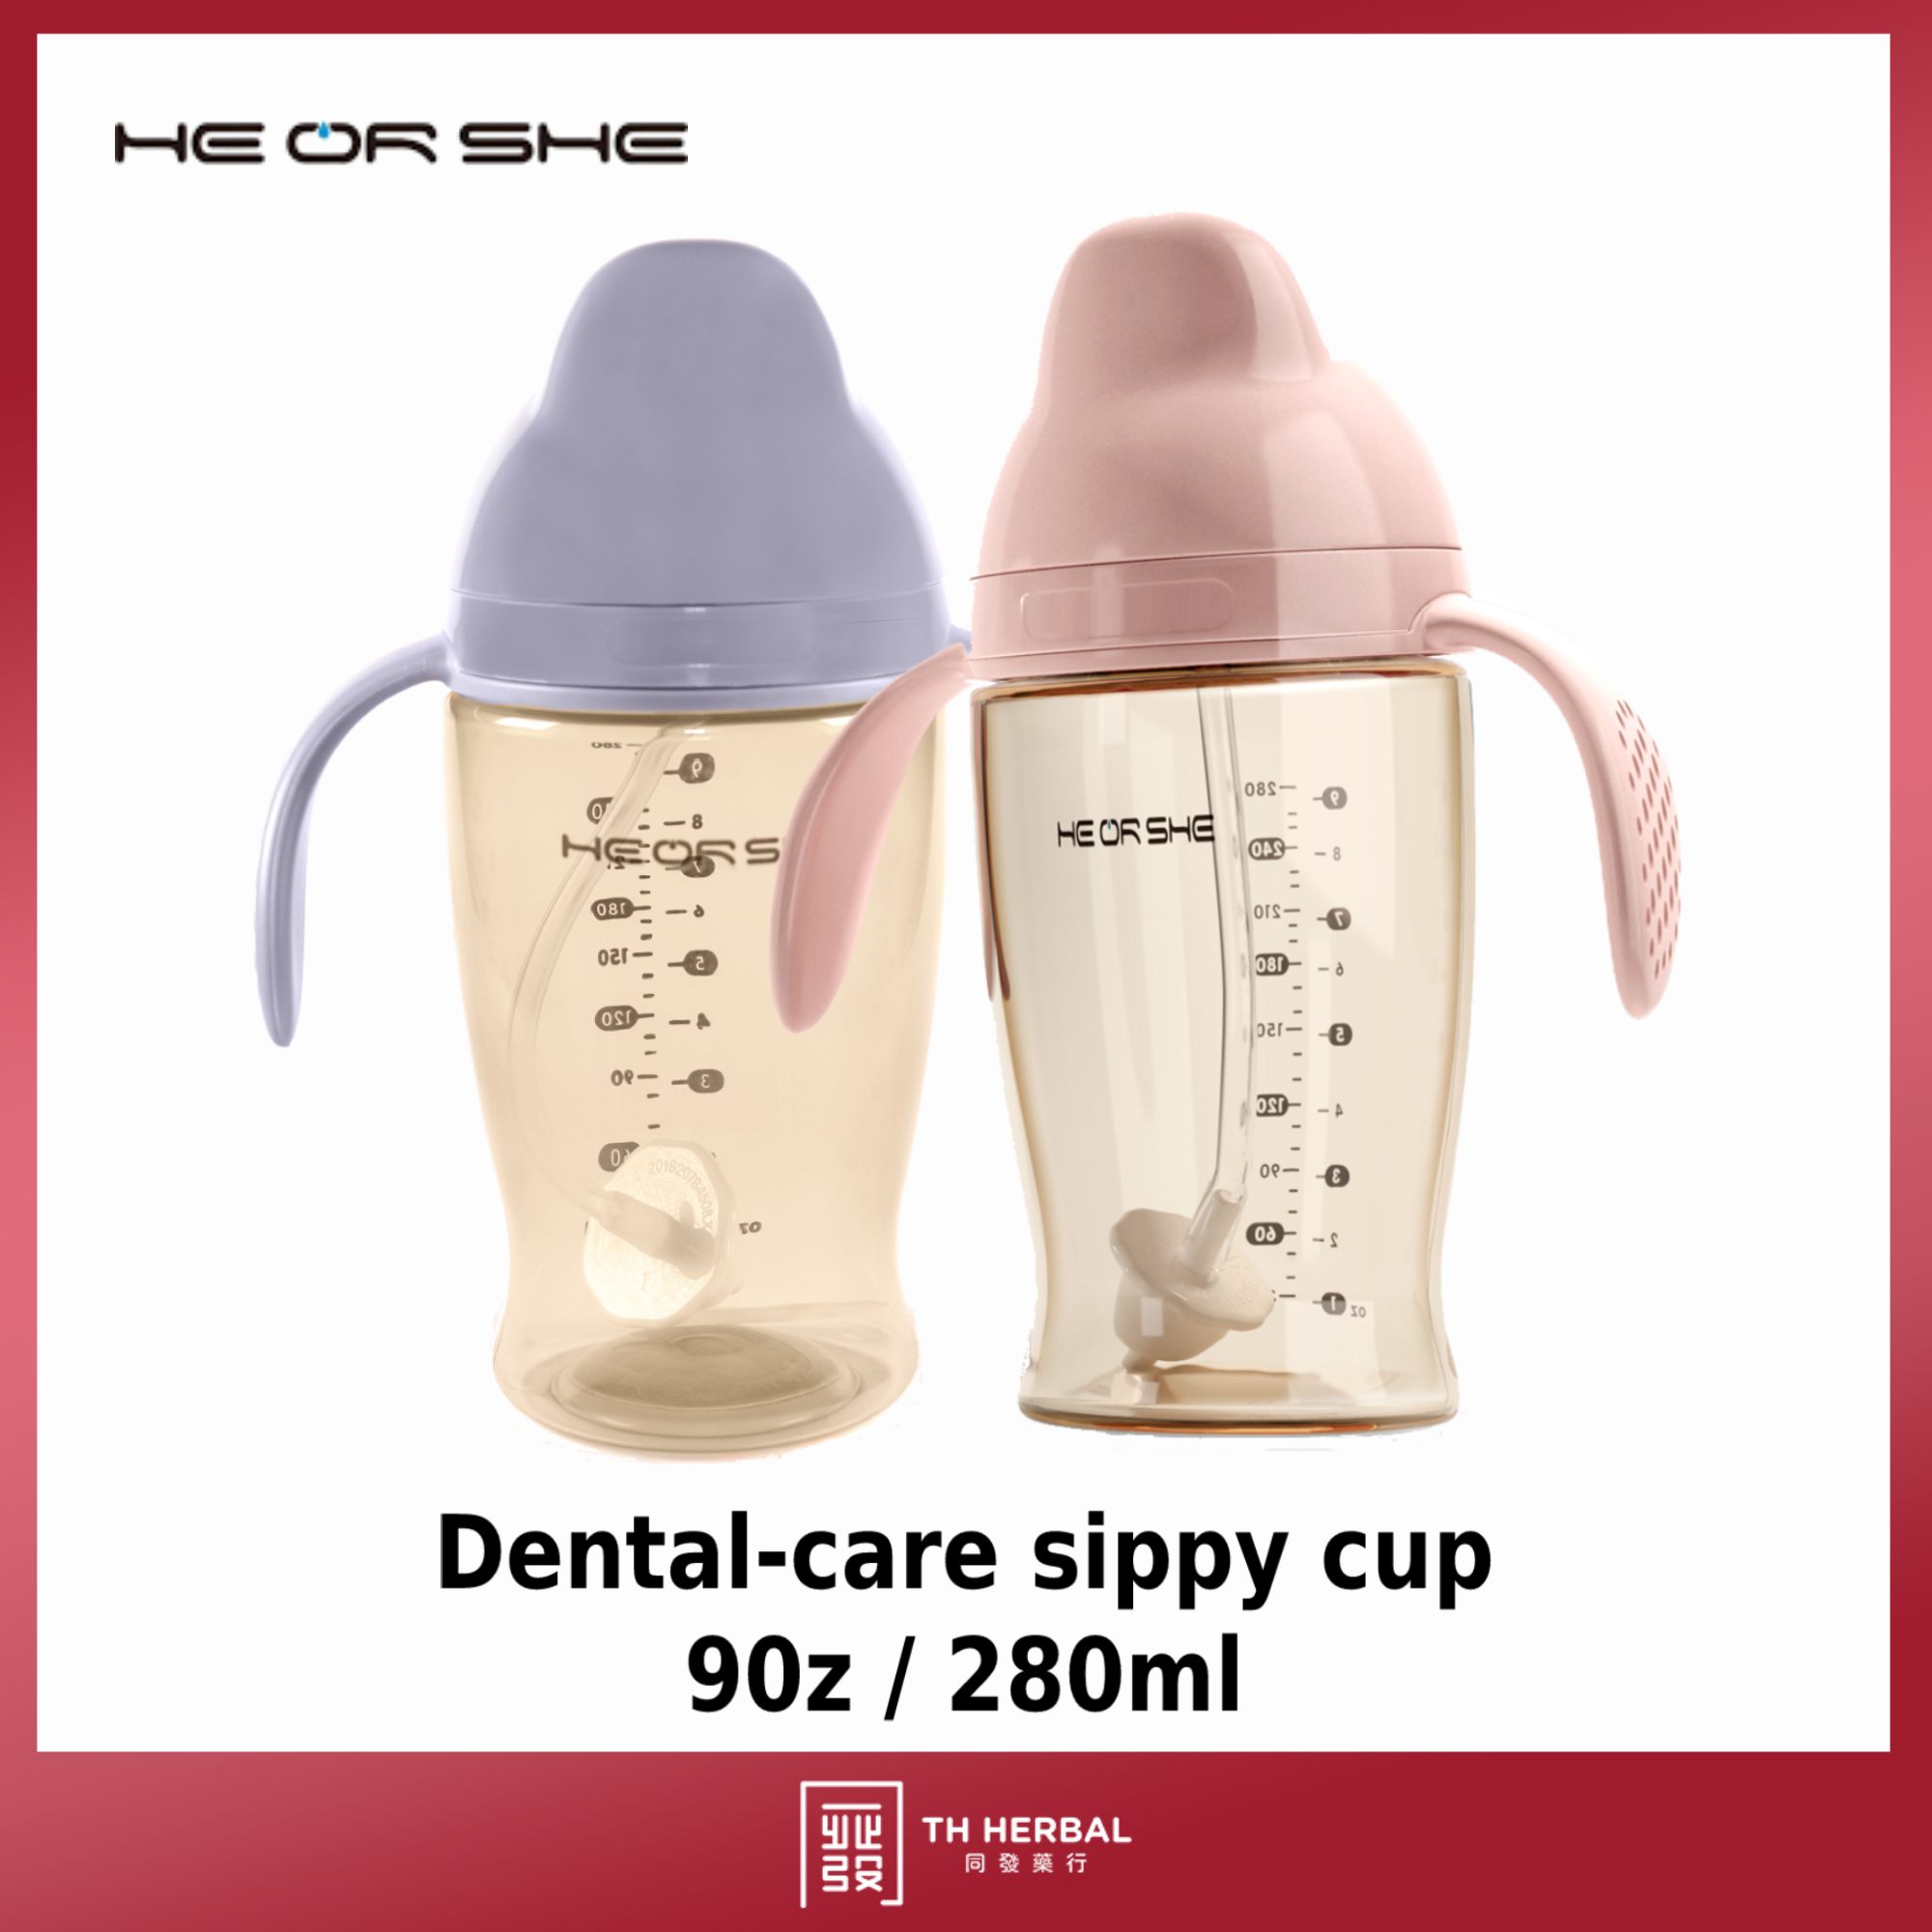 HE OR SHE Dental-care sippy cup 280ml 1.png